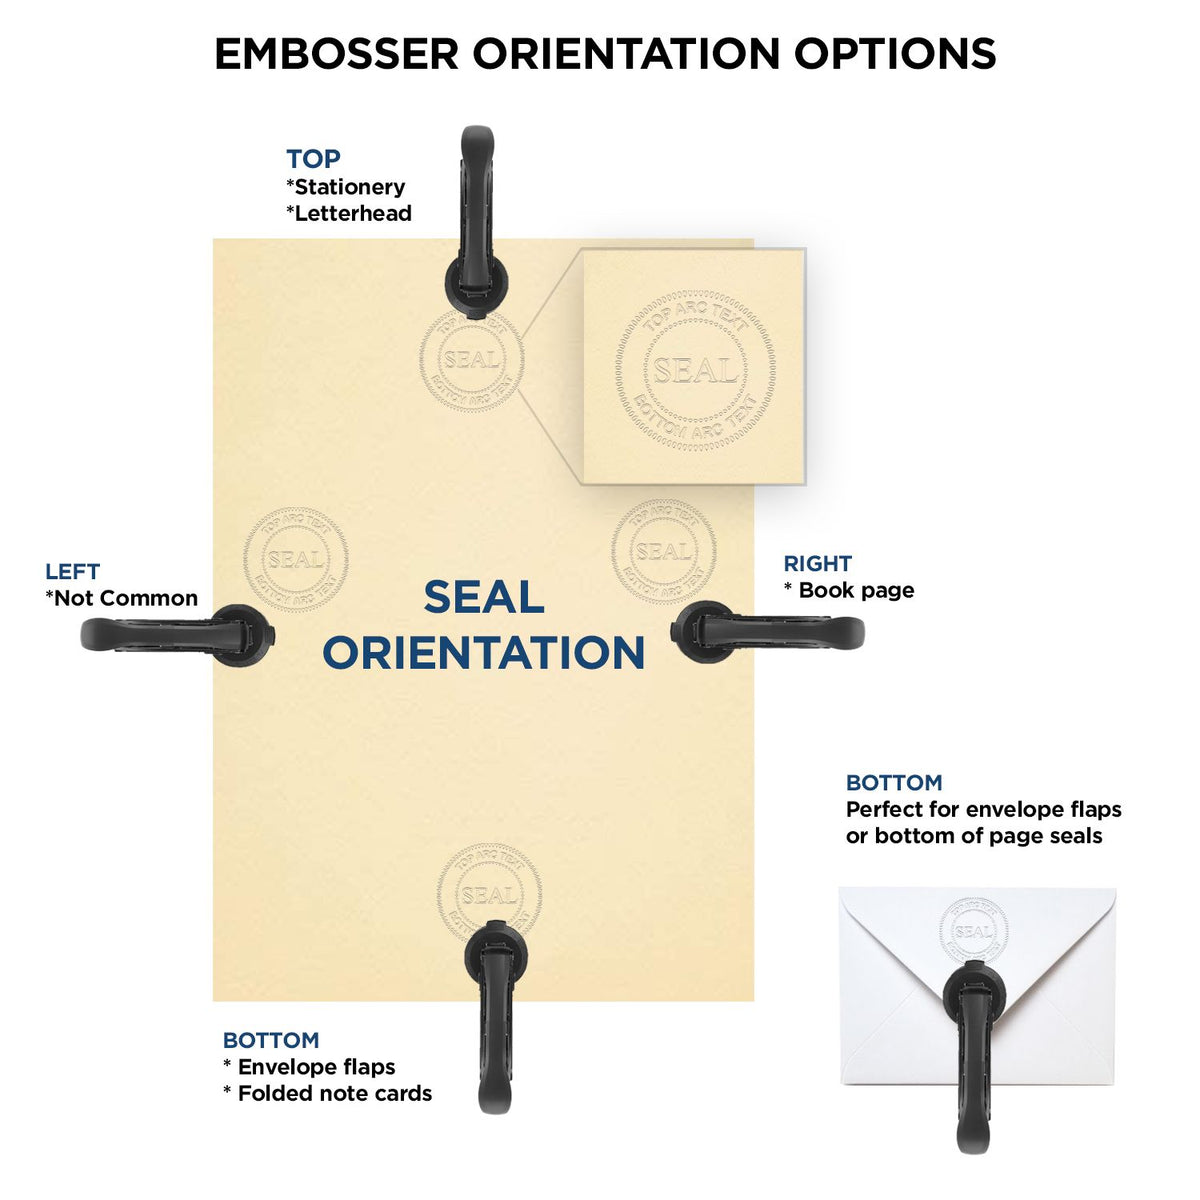 An infographic for the State of North Dakota Extended Long Reach Geologist Seal showing embosser orientation, this is showing examples of a top, bottom, right and left insert.